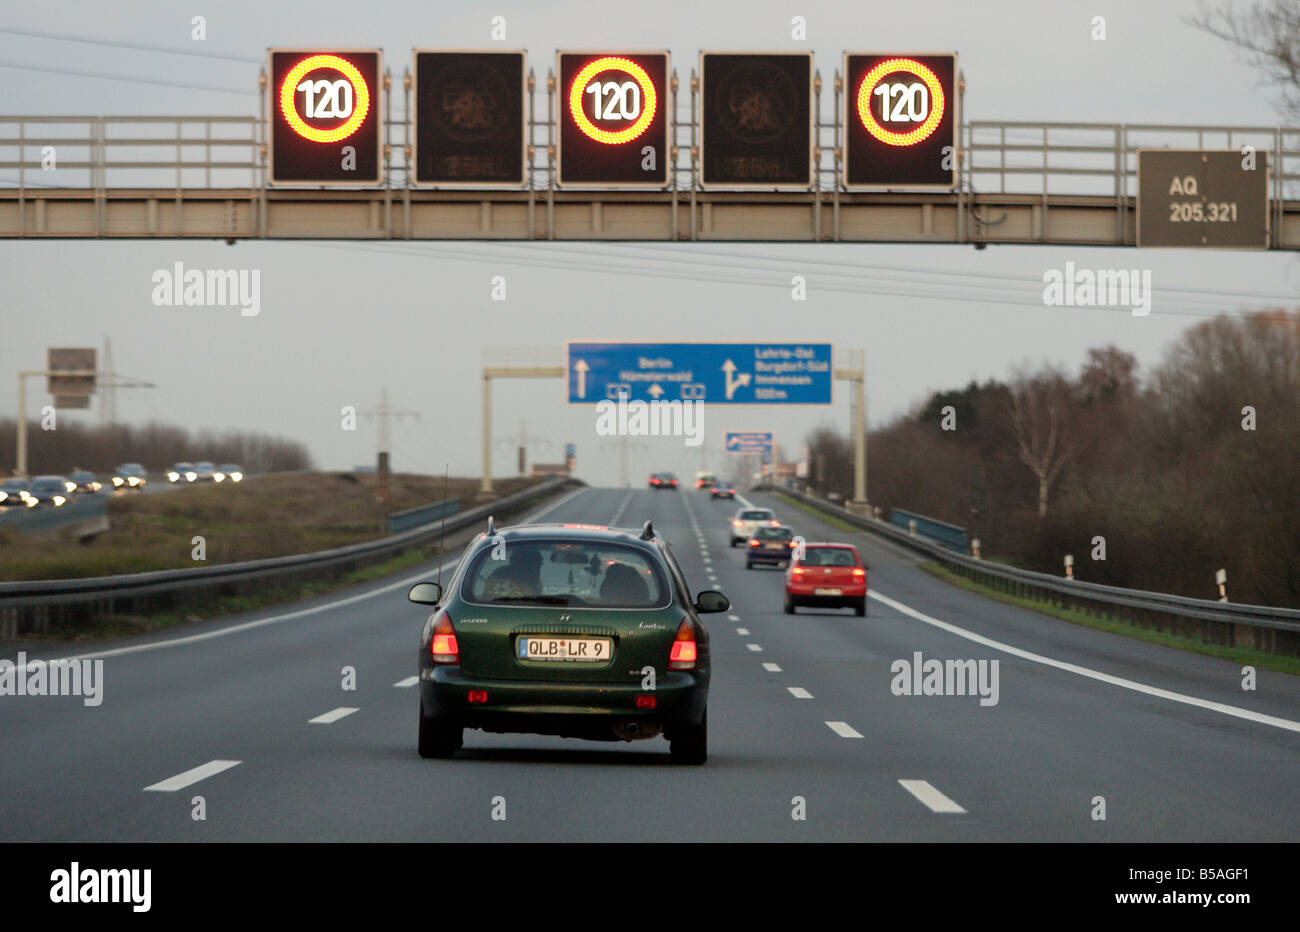 Speed limit display on the highway A2, Hannover, Germany Stock Photo